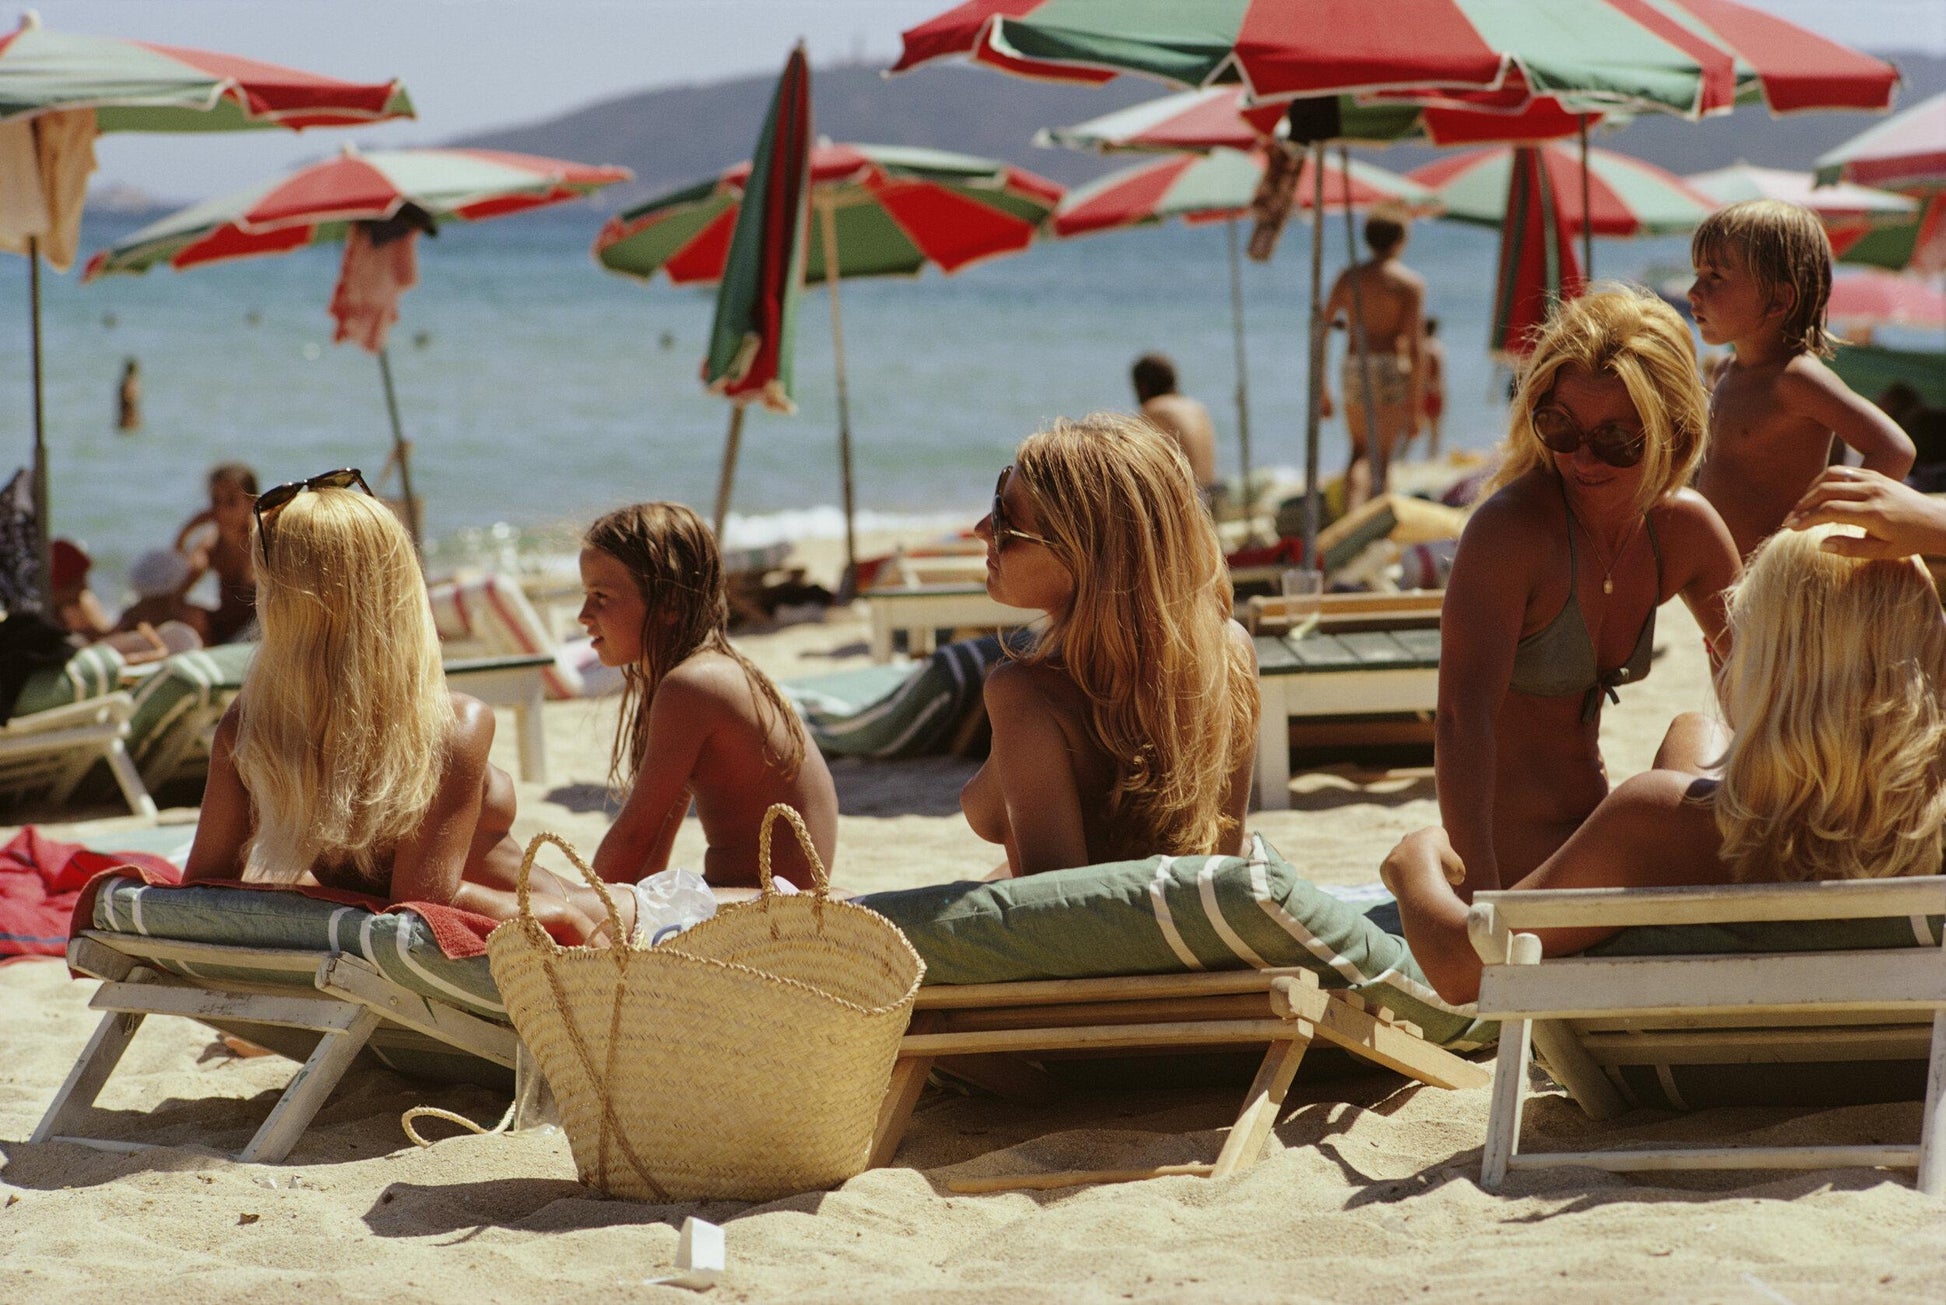 Slim Aarons: Saint-Tropez Beach photo for sale Getty Images Gallery